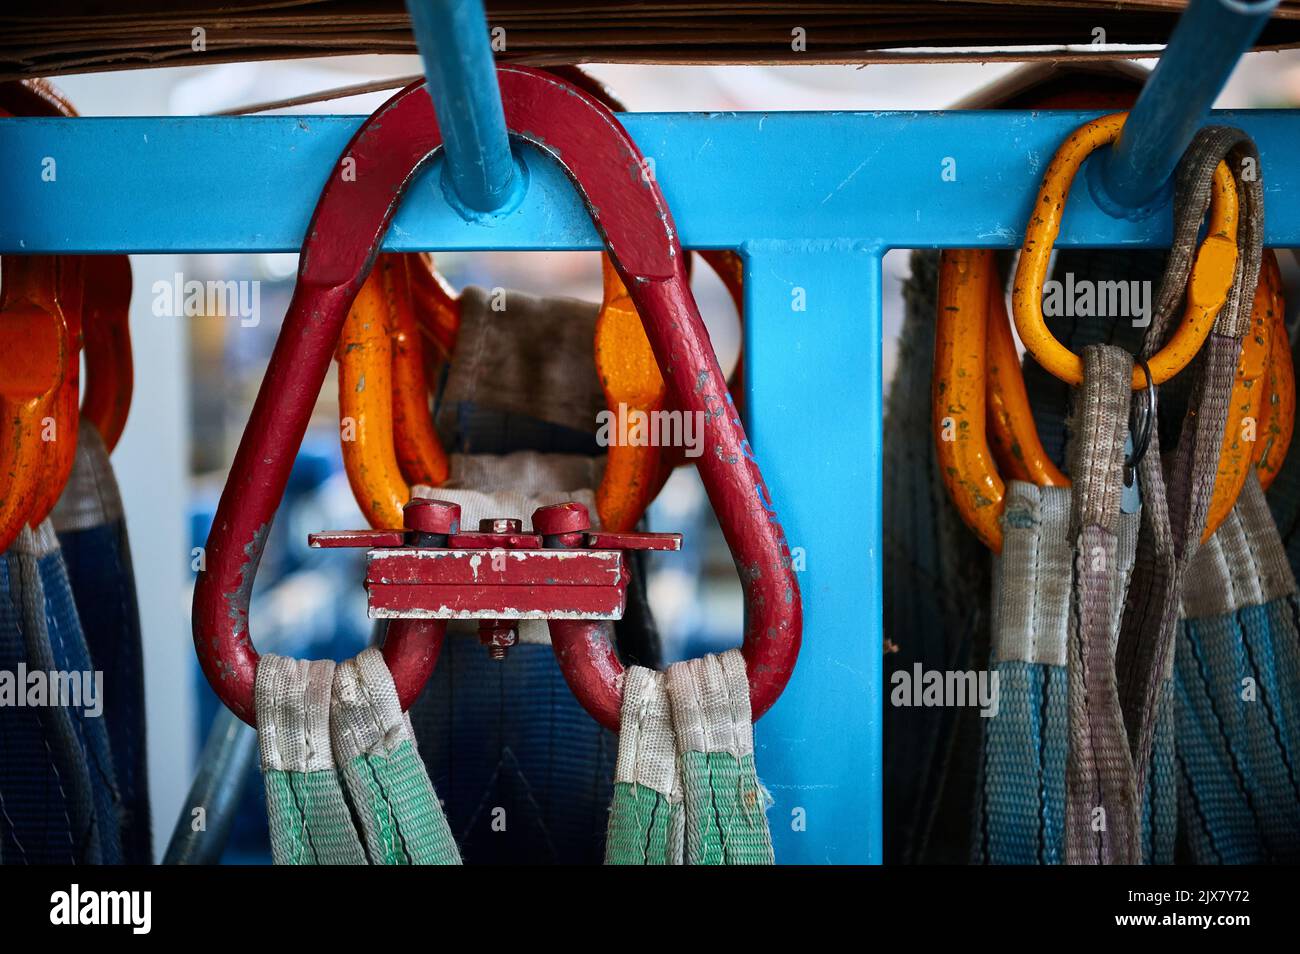 Rigging equipment with strops hangs on rack in warehouse Stock Photo